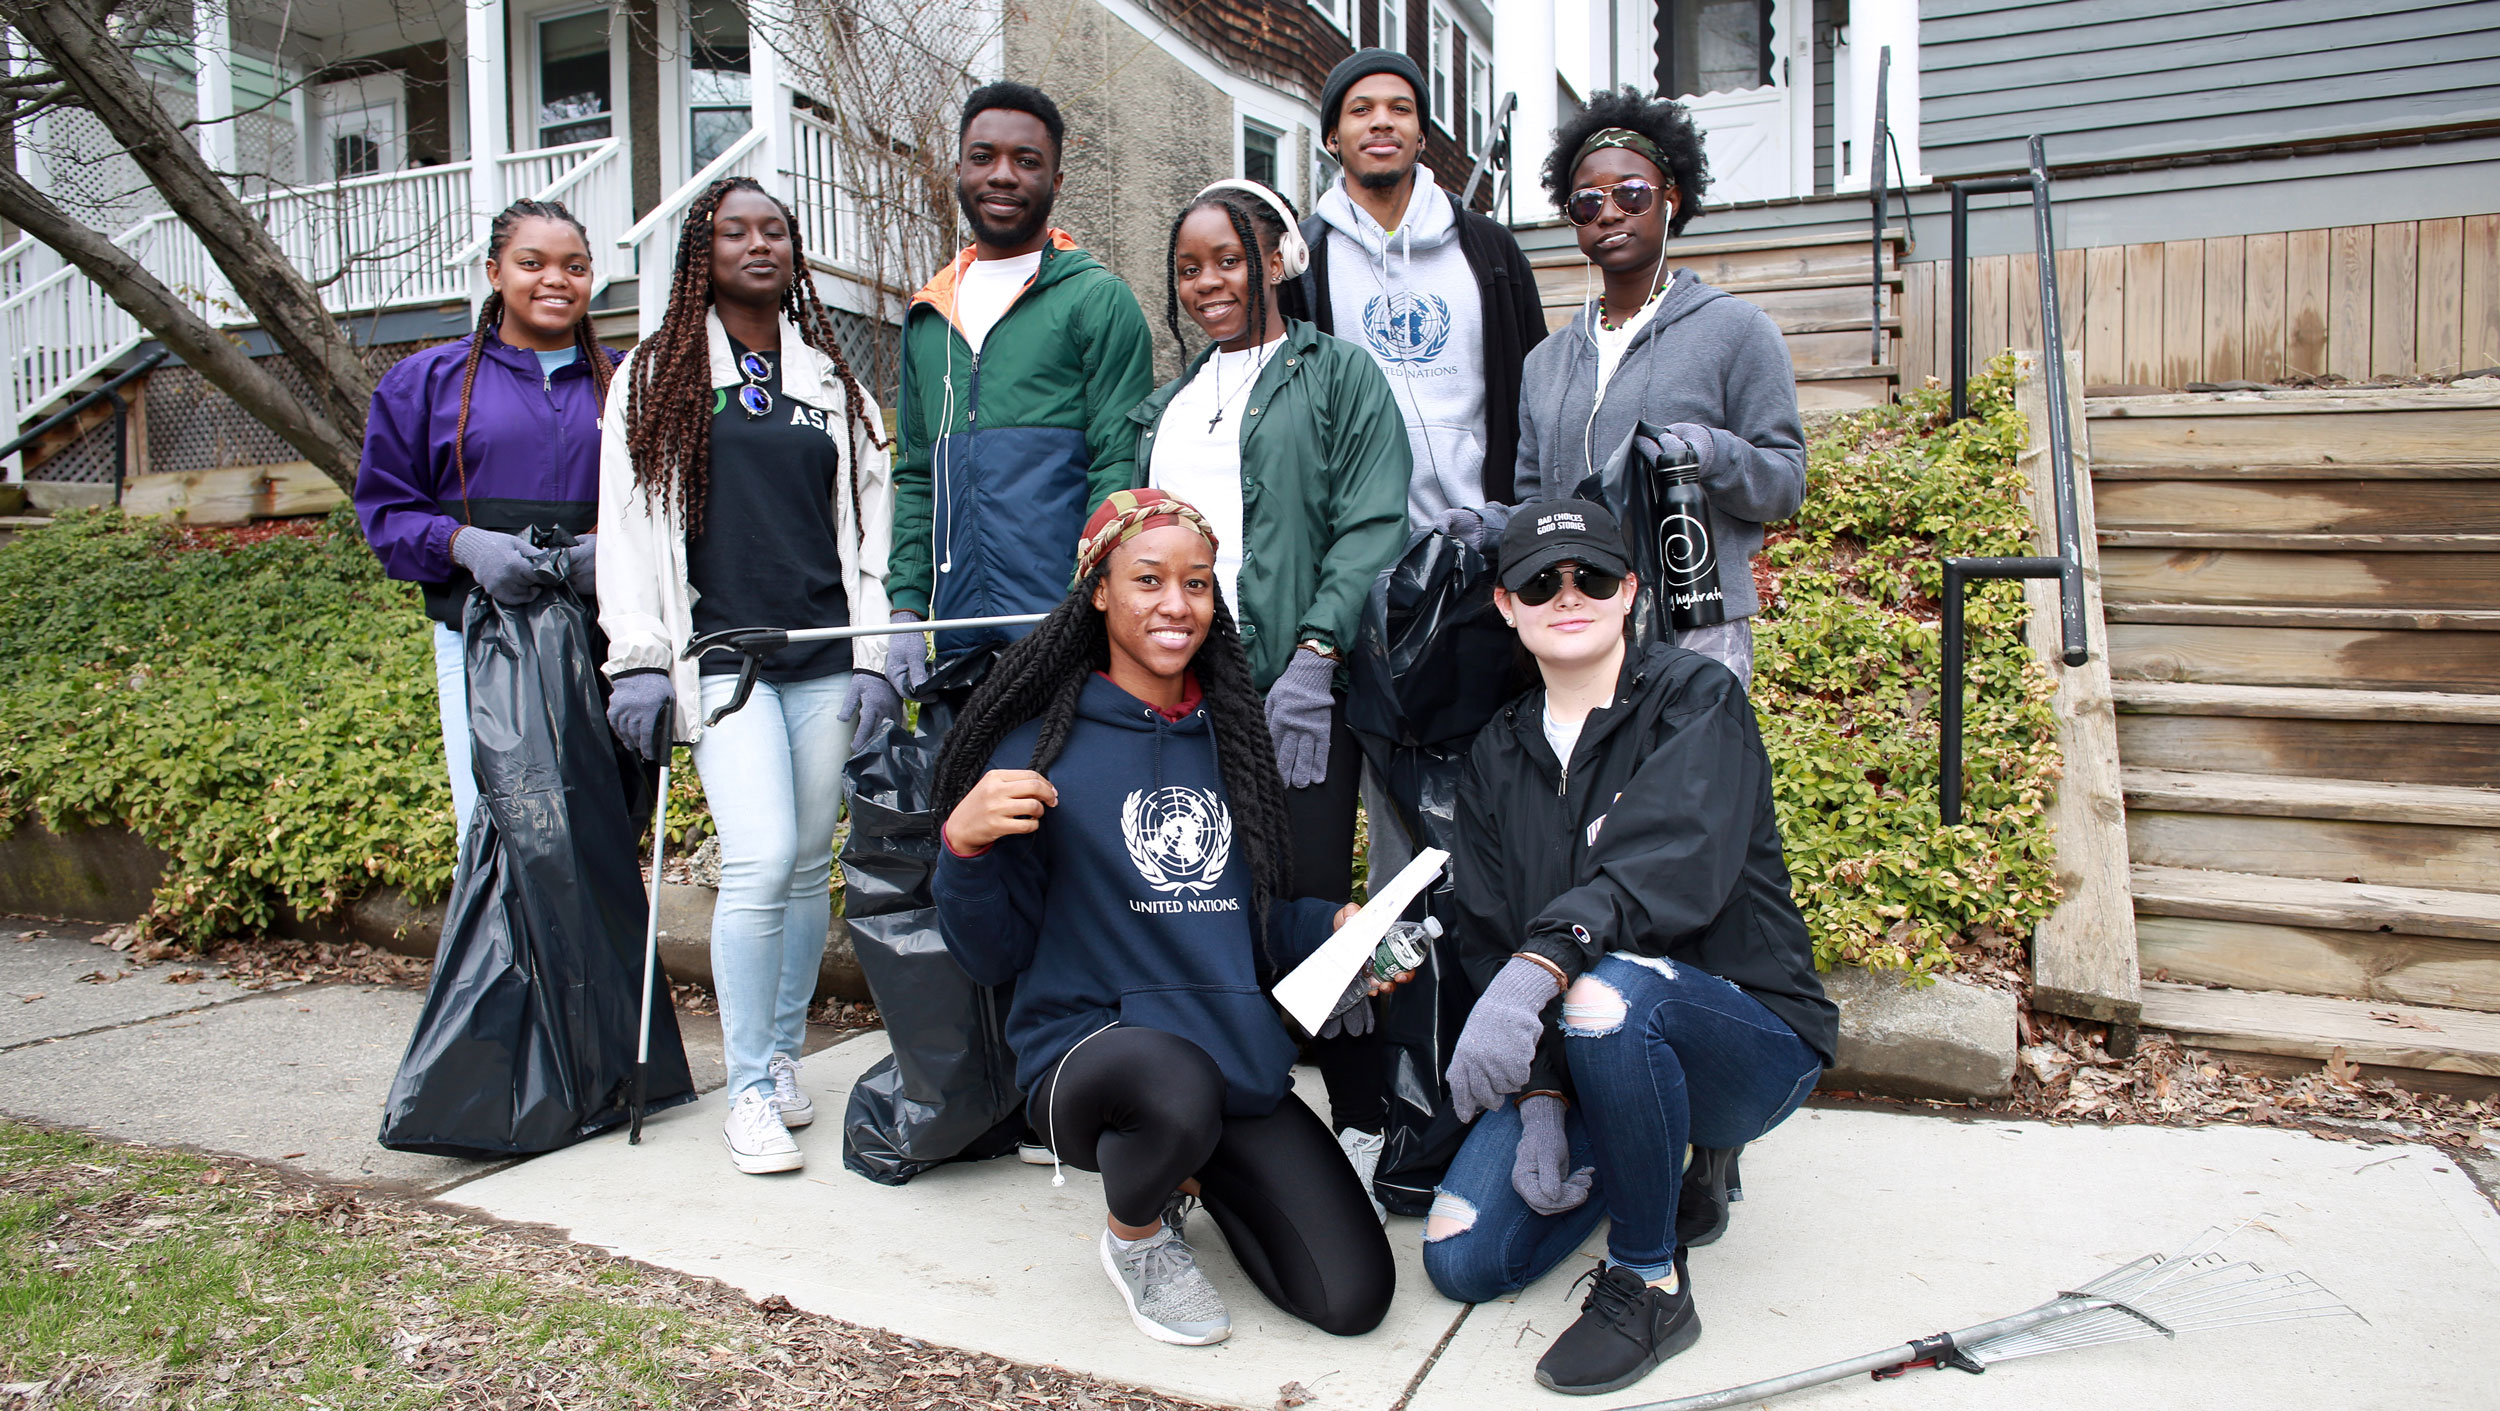 Eight students pose for a photo during a neighborhood clean-up event.